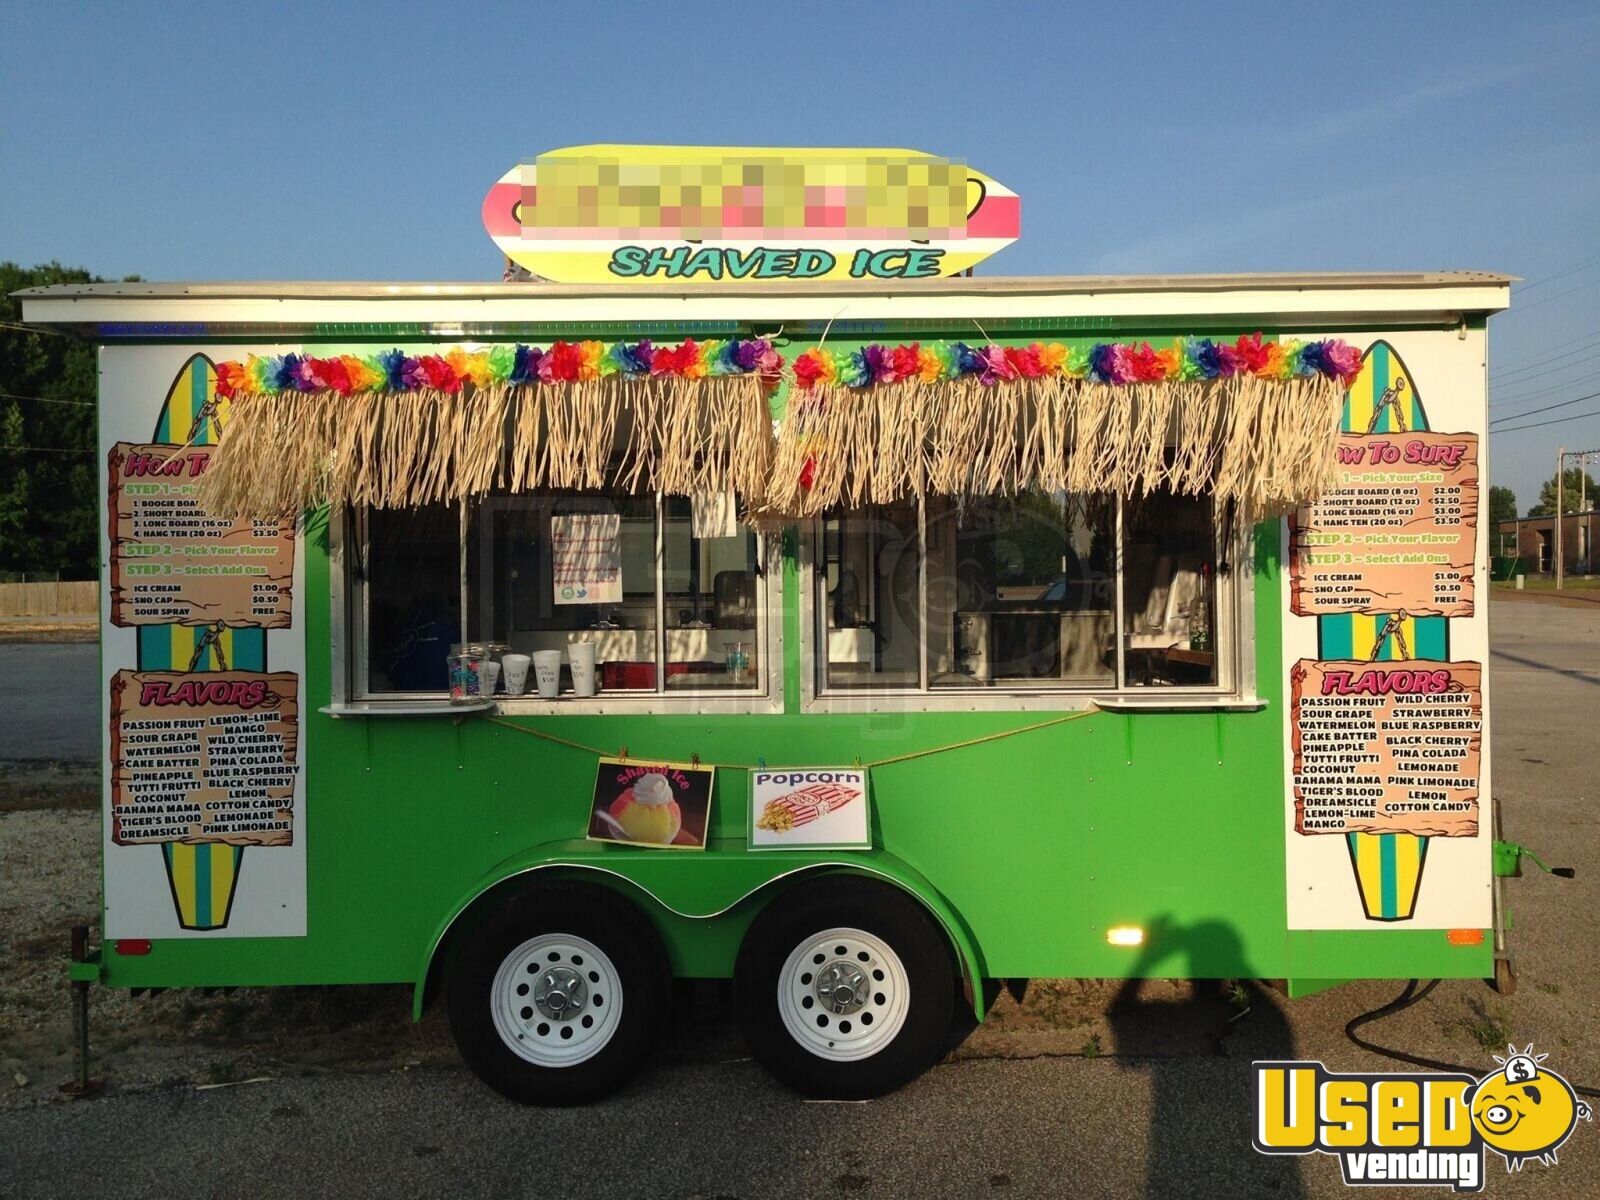 Turnkey Sno Pro Shaved Ice Trailer Concession Business For Sale